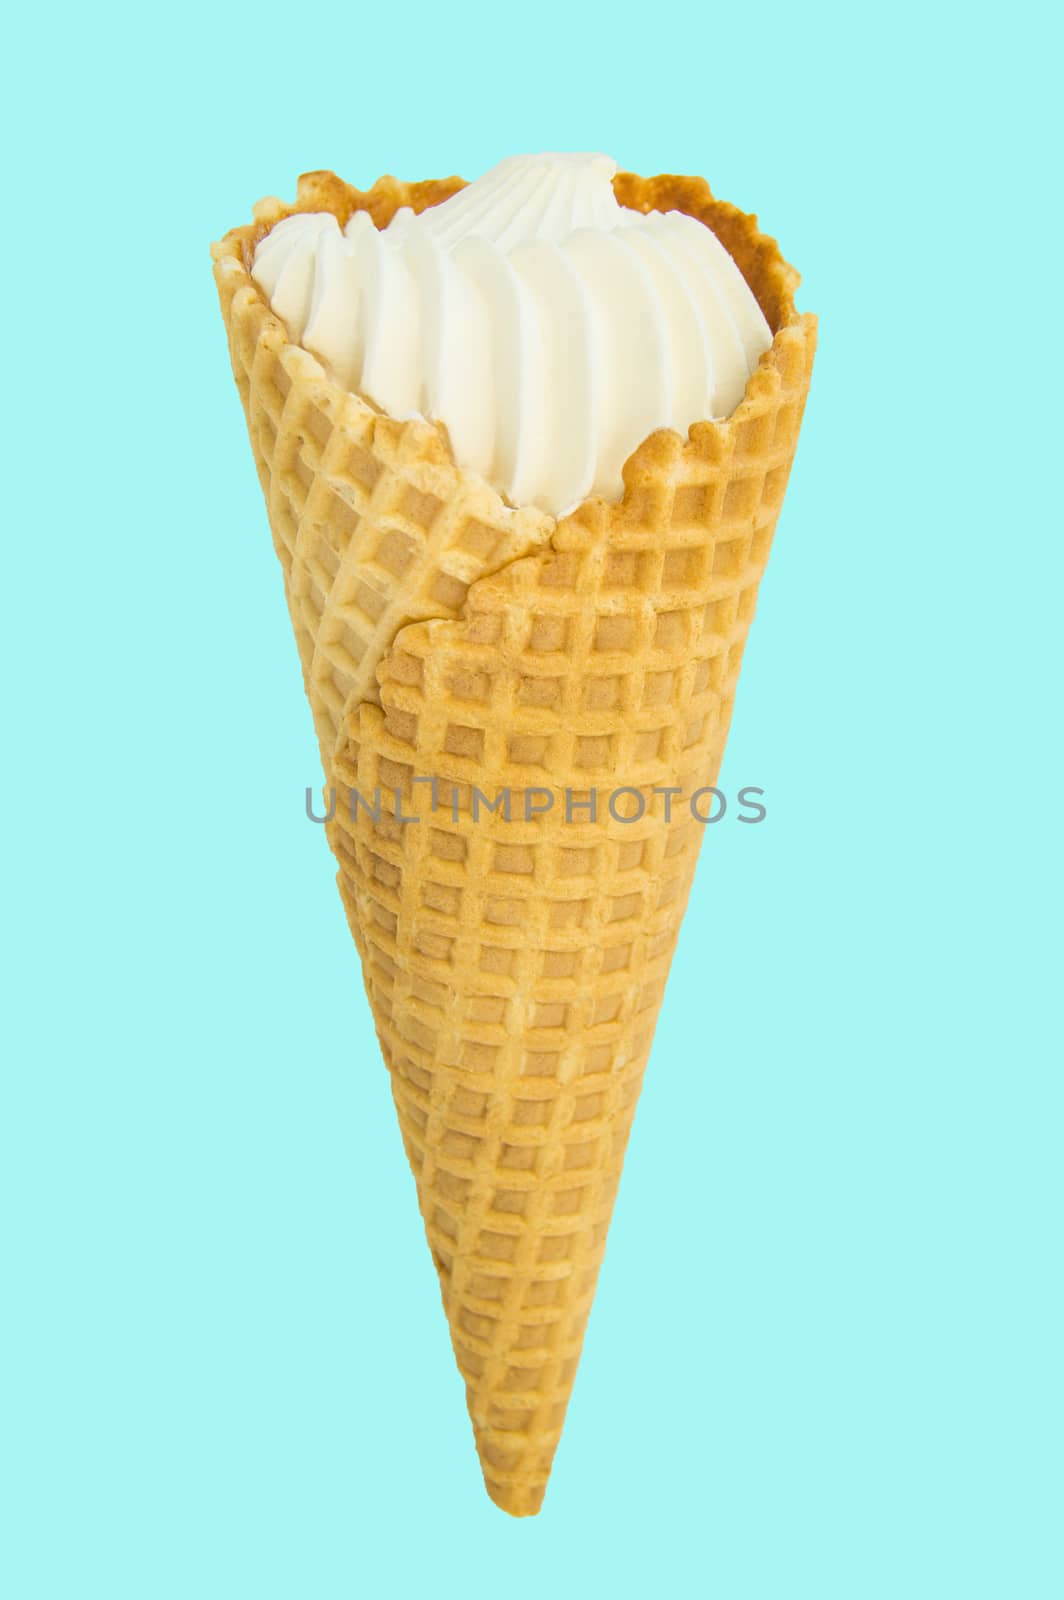 Vanilla ice cream in waffle conVanilla ice cream in waffle cone isolated on pastel blue background, vertical close-up framend,